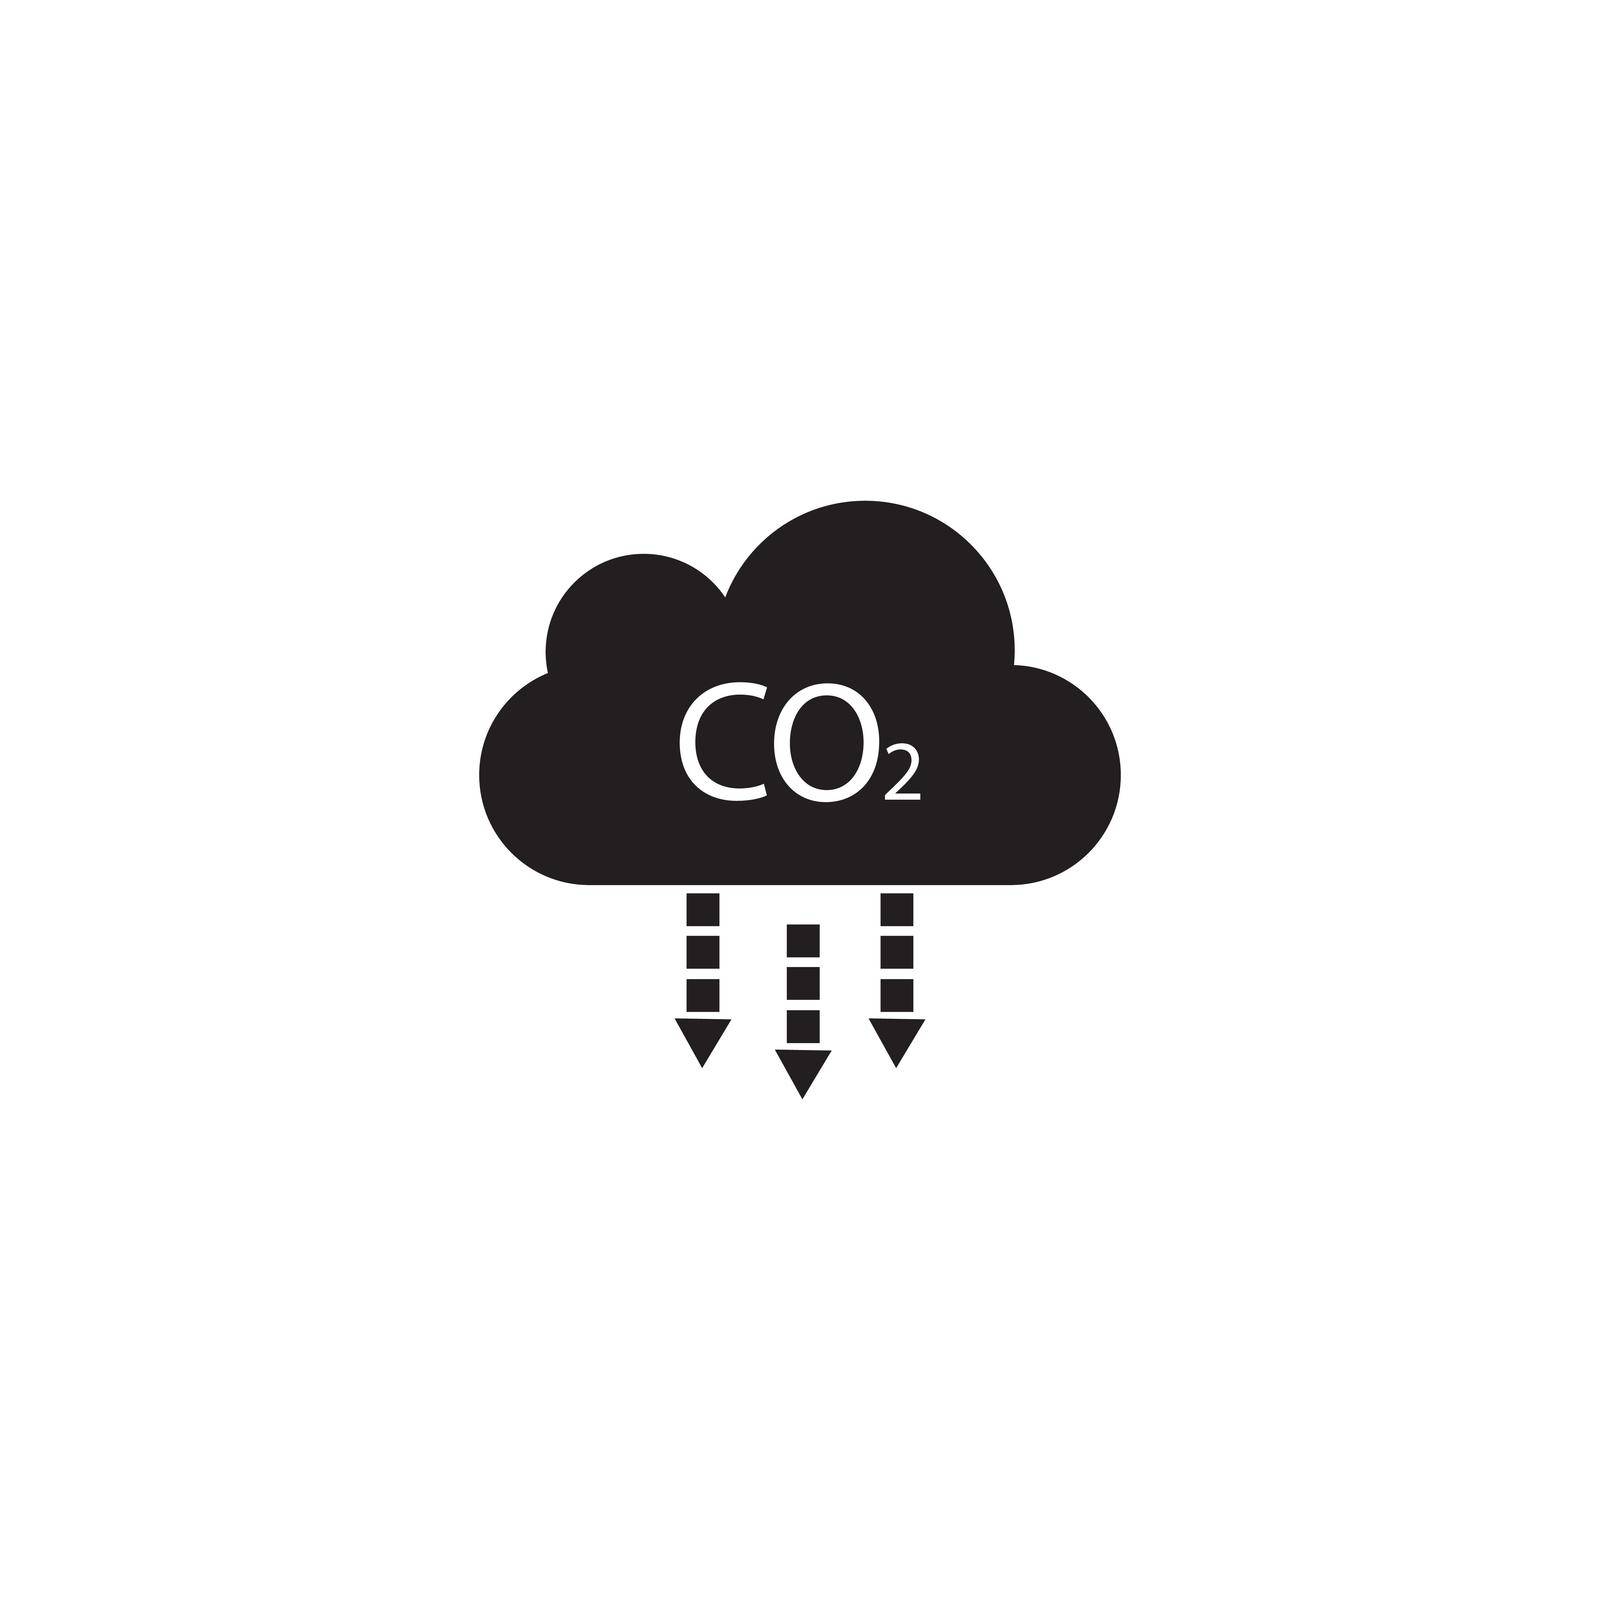 Co2 icon logo vctor  by ABD03